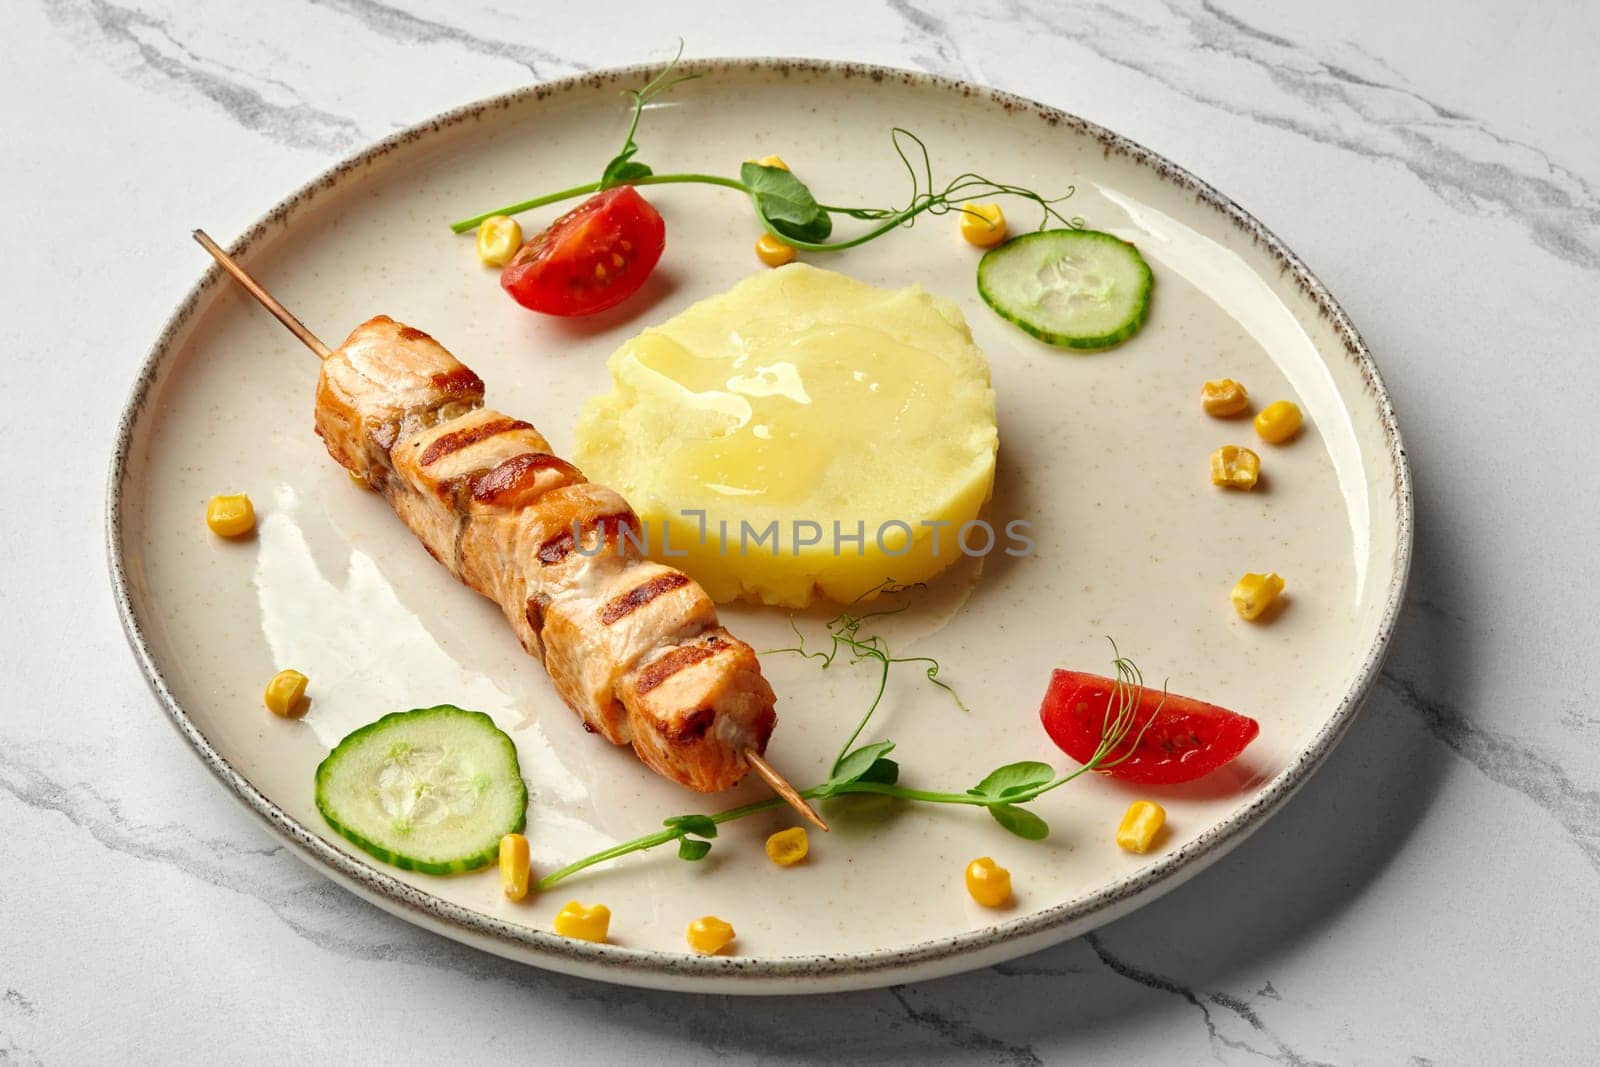 Mini grilled salmon skewer with mashed potatoes for kids menu by nazarovsergey